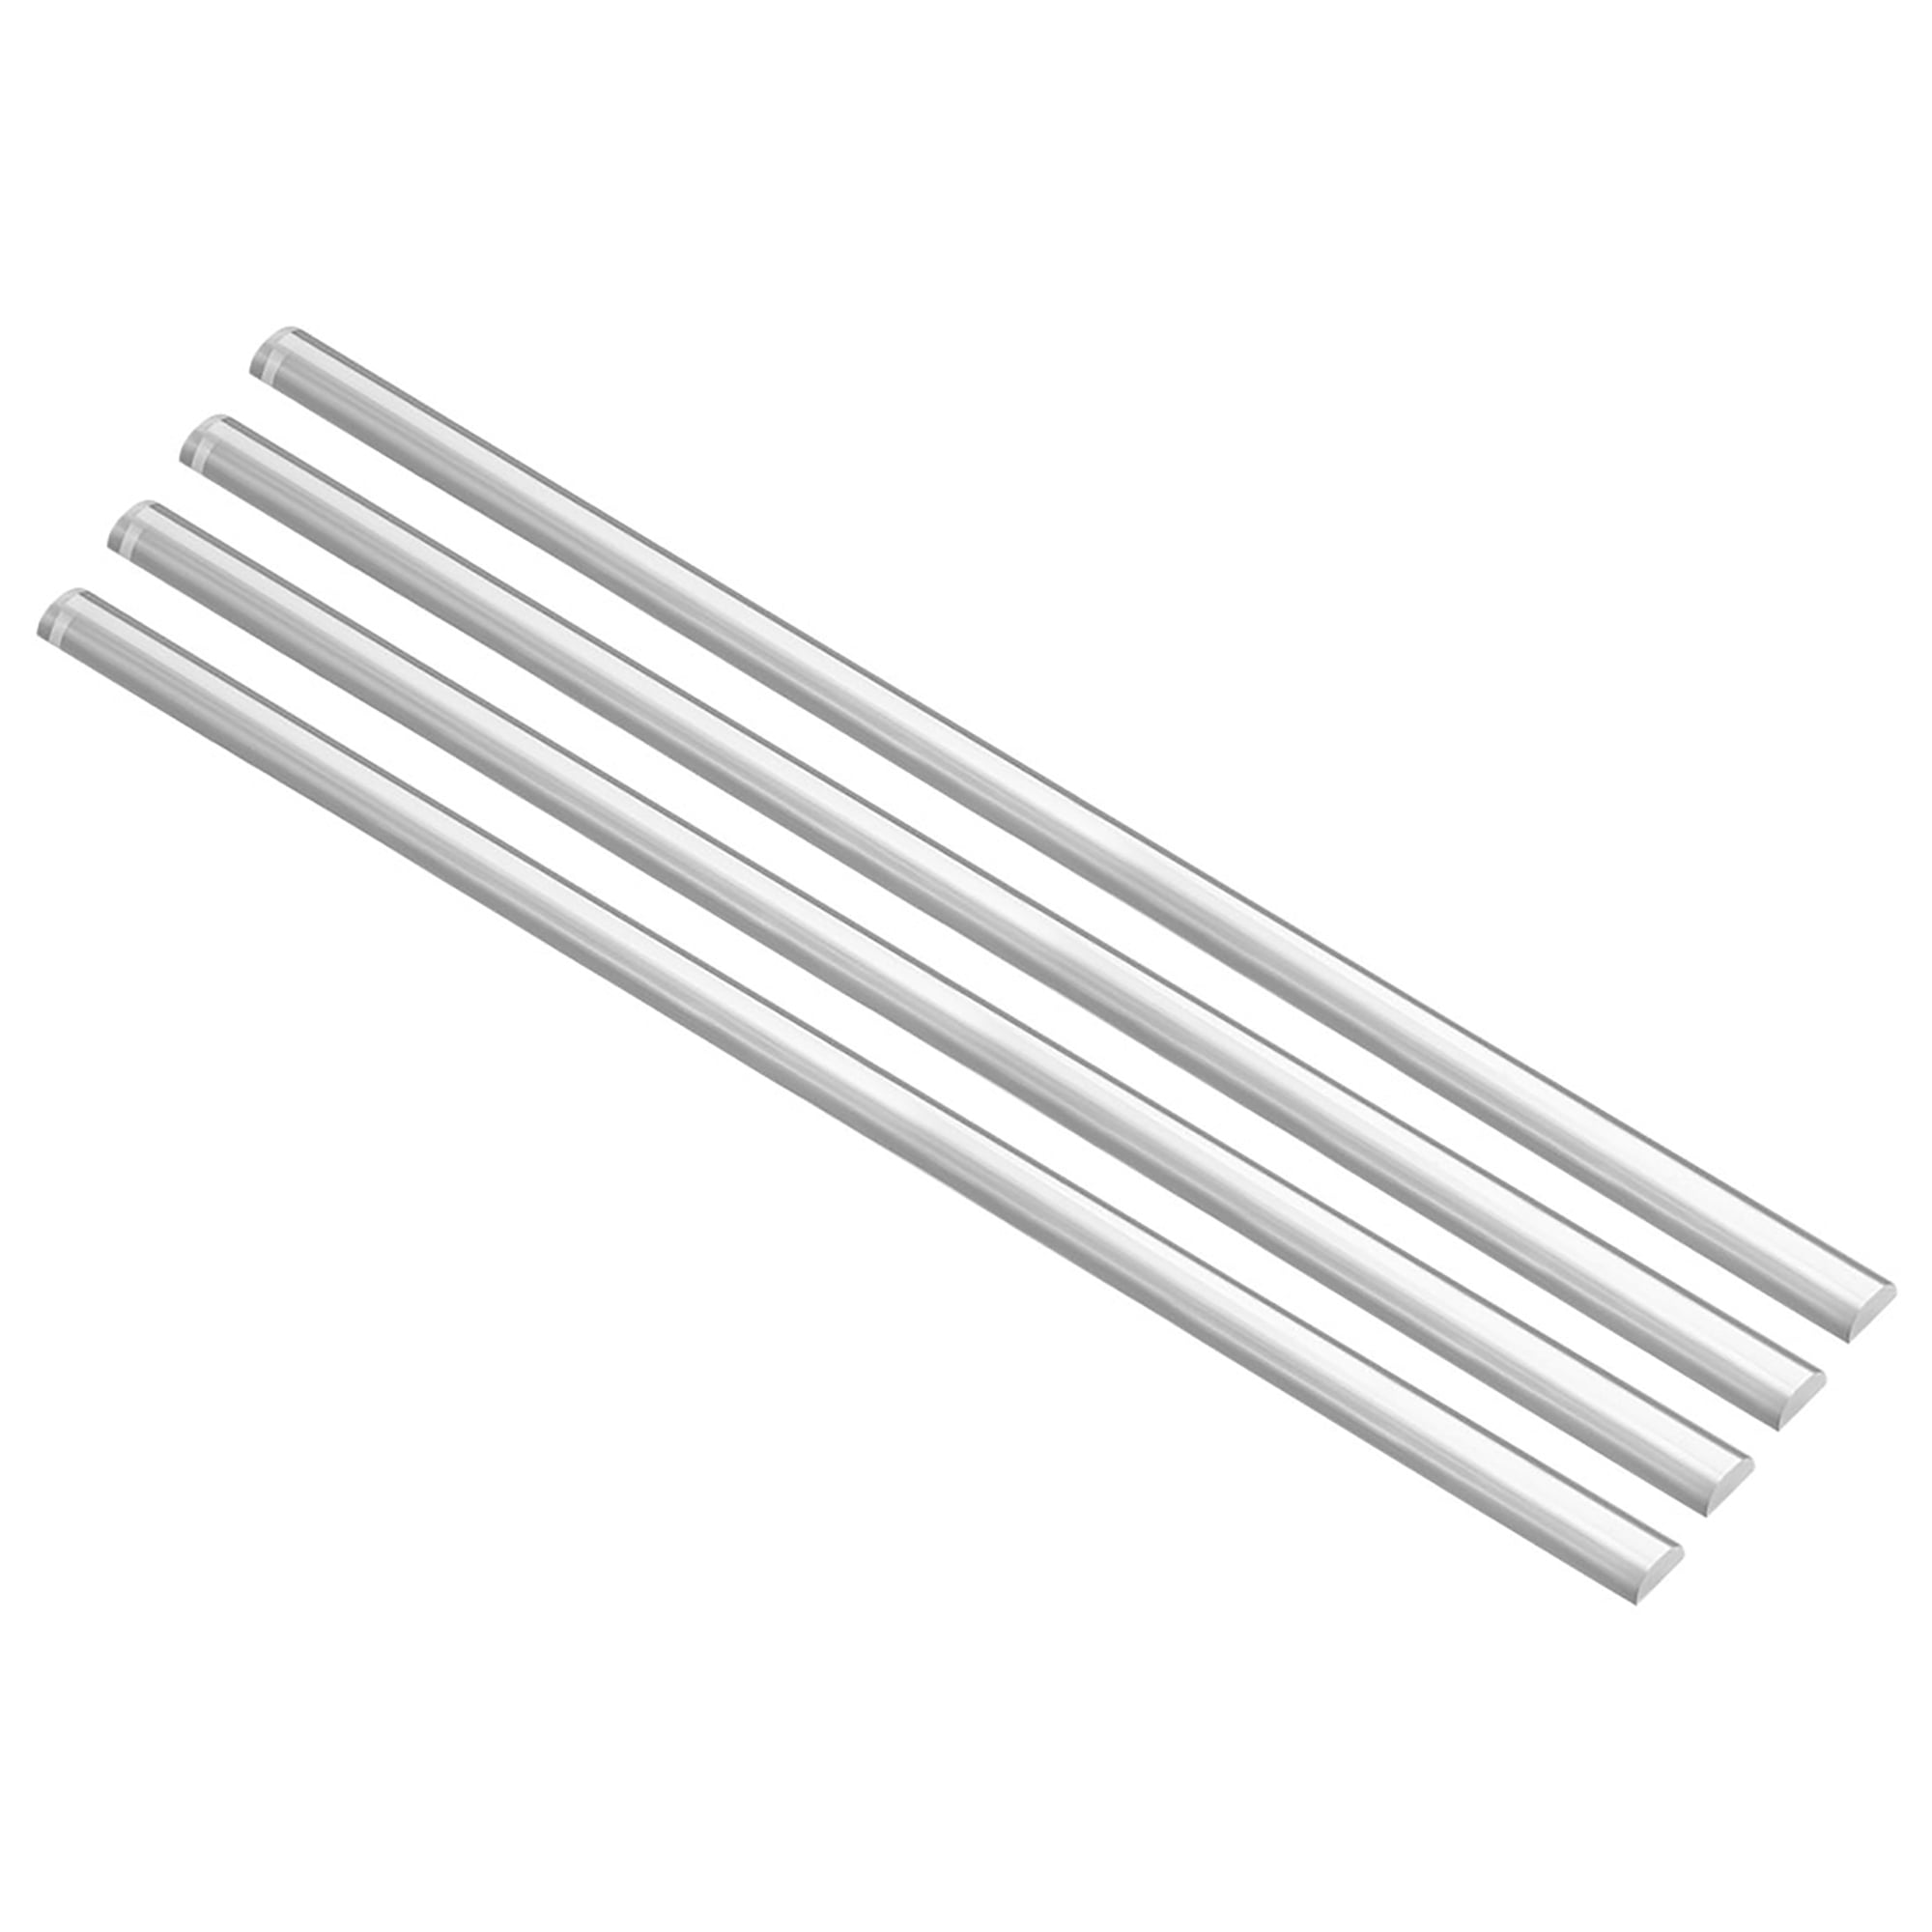 50MM LENGTHS ROUND PERSPEX SOLID BAR 100MM CLEAR ACRYLIC ROD 2MM 500MM LONG